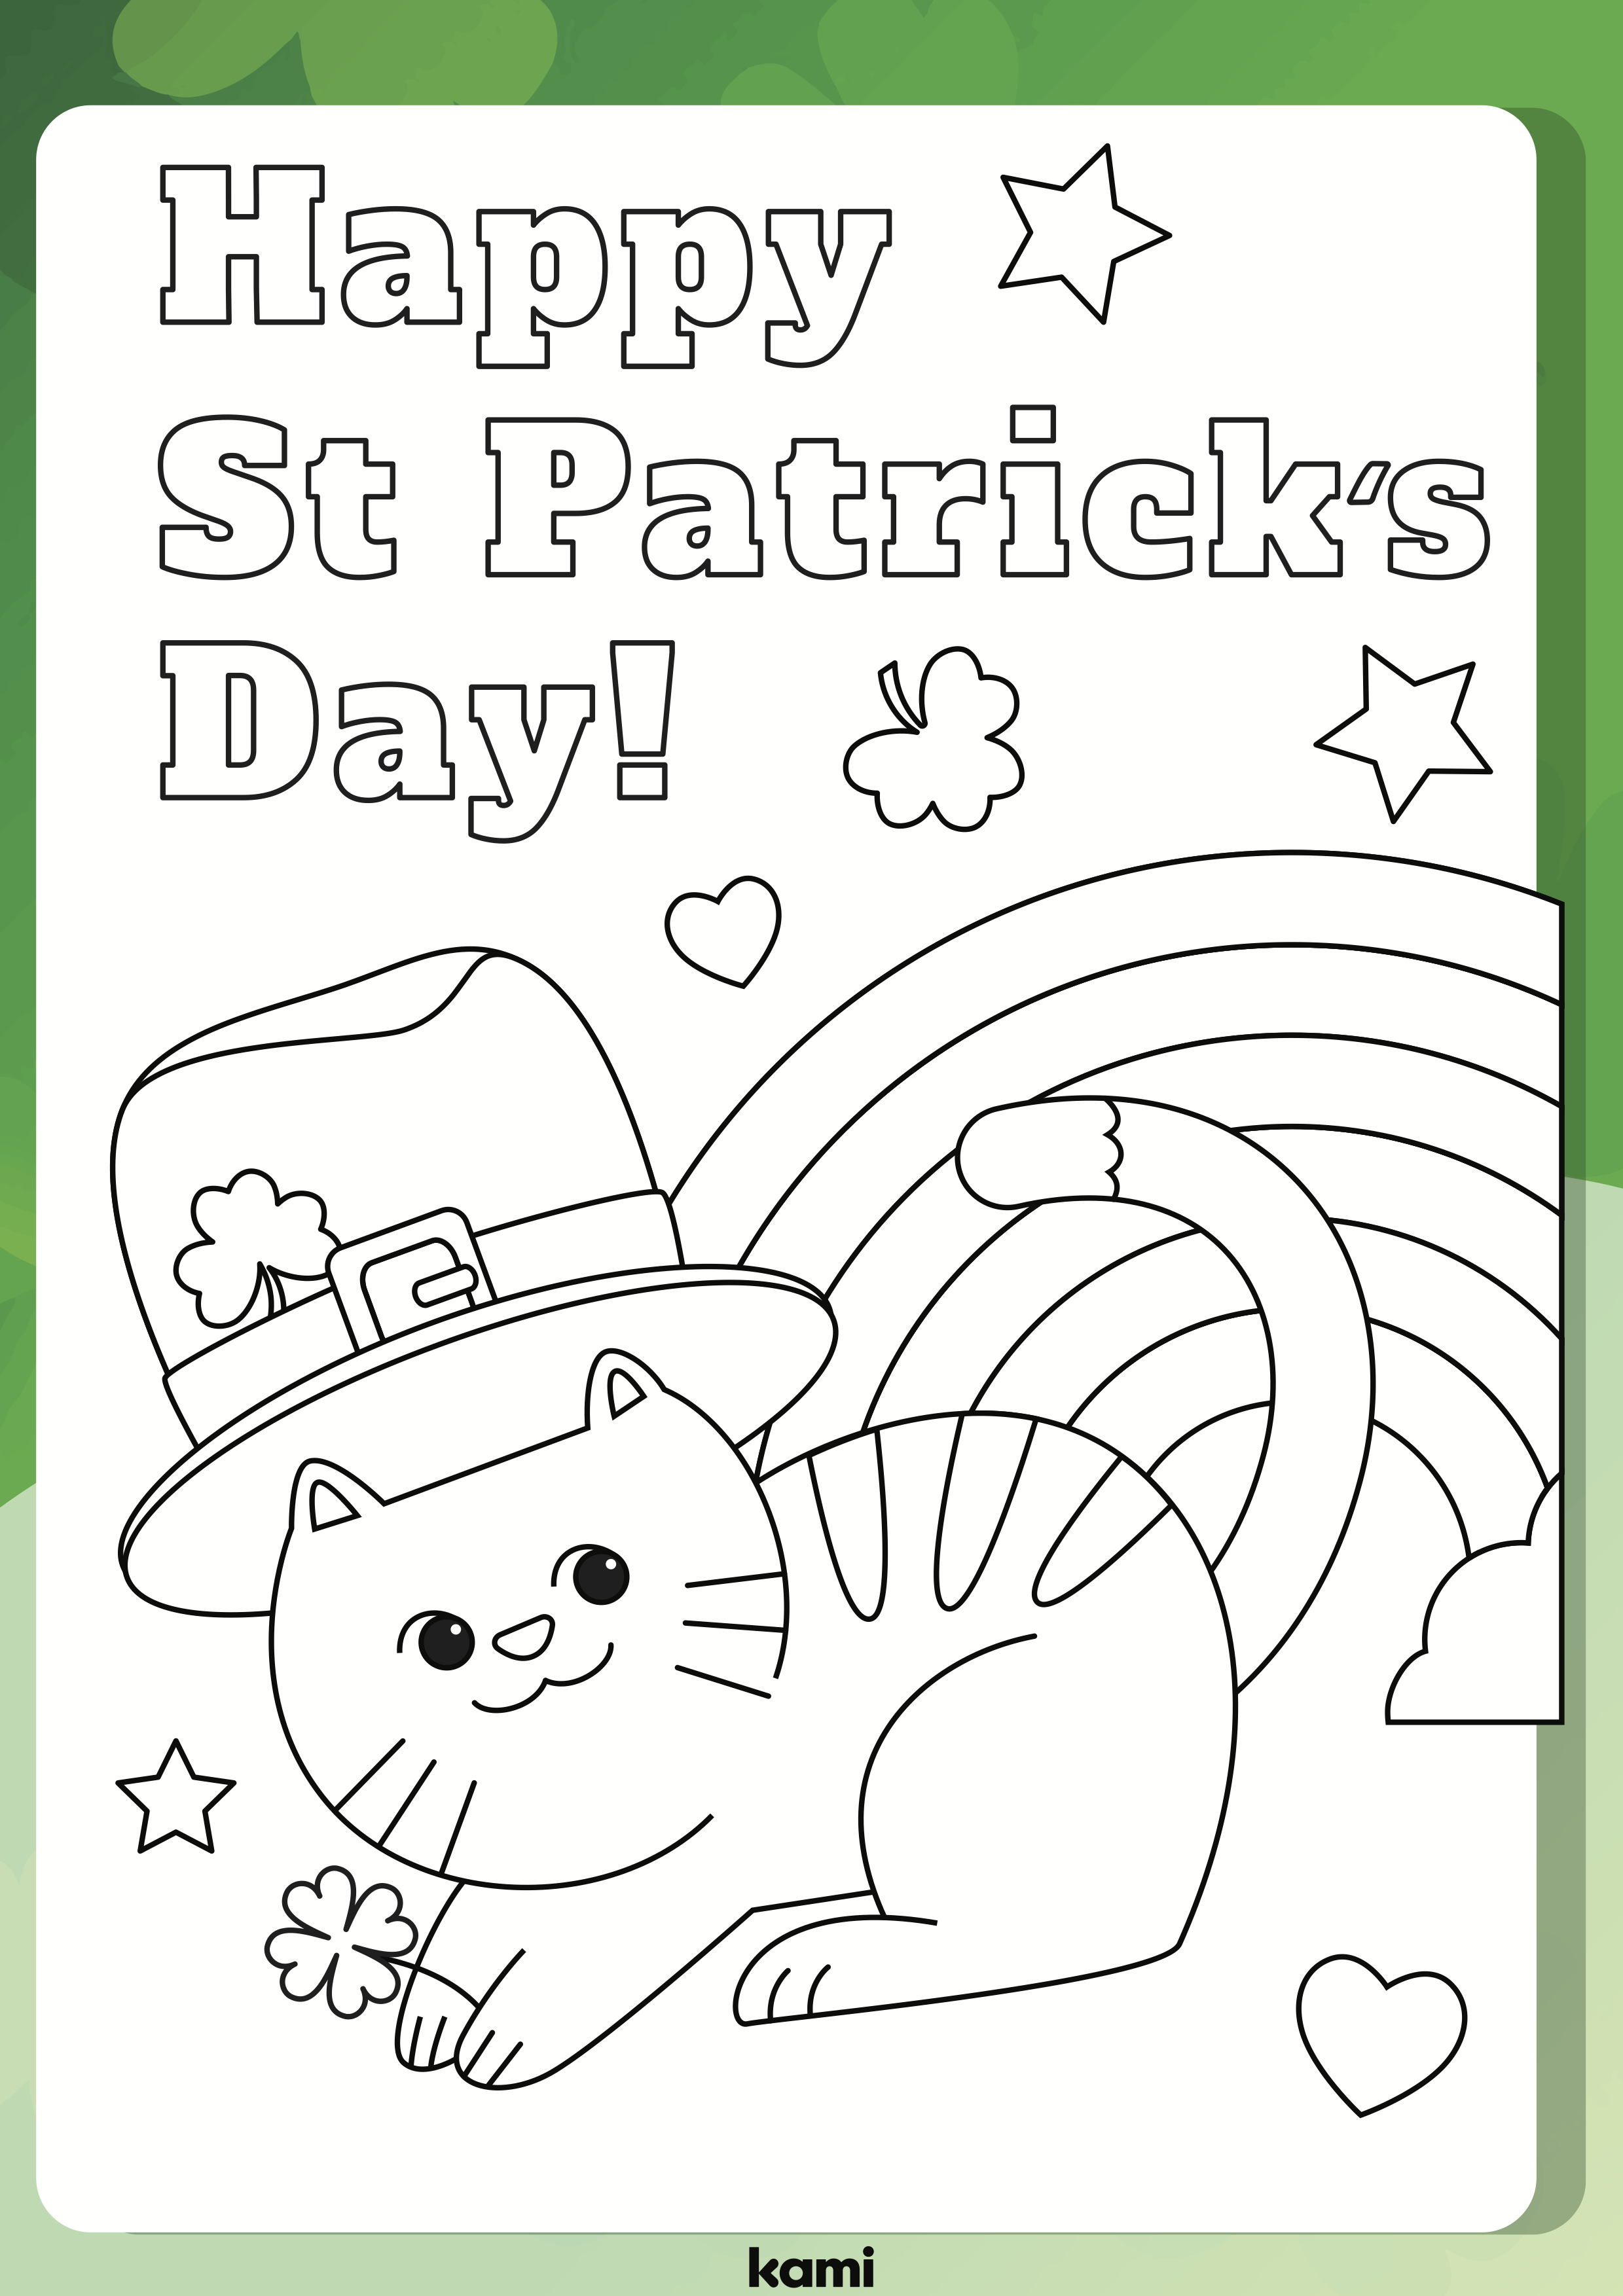 st-patrick-s-day-coloring-sheet-cat-for-teachers-perfect-for-grades